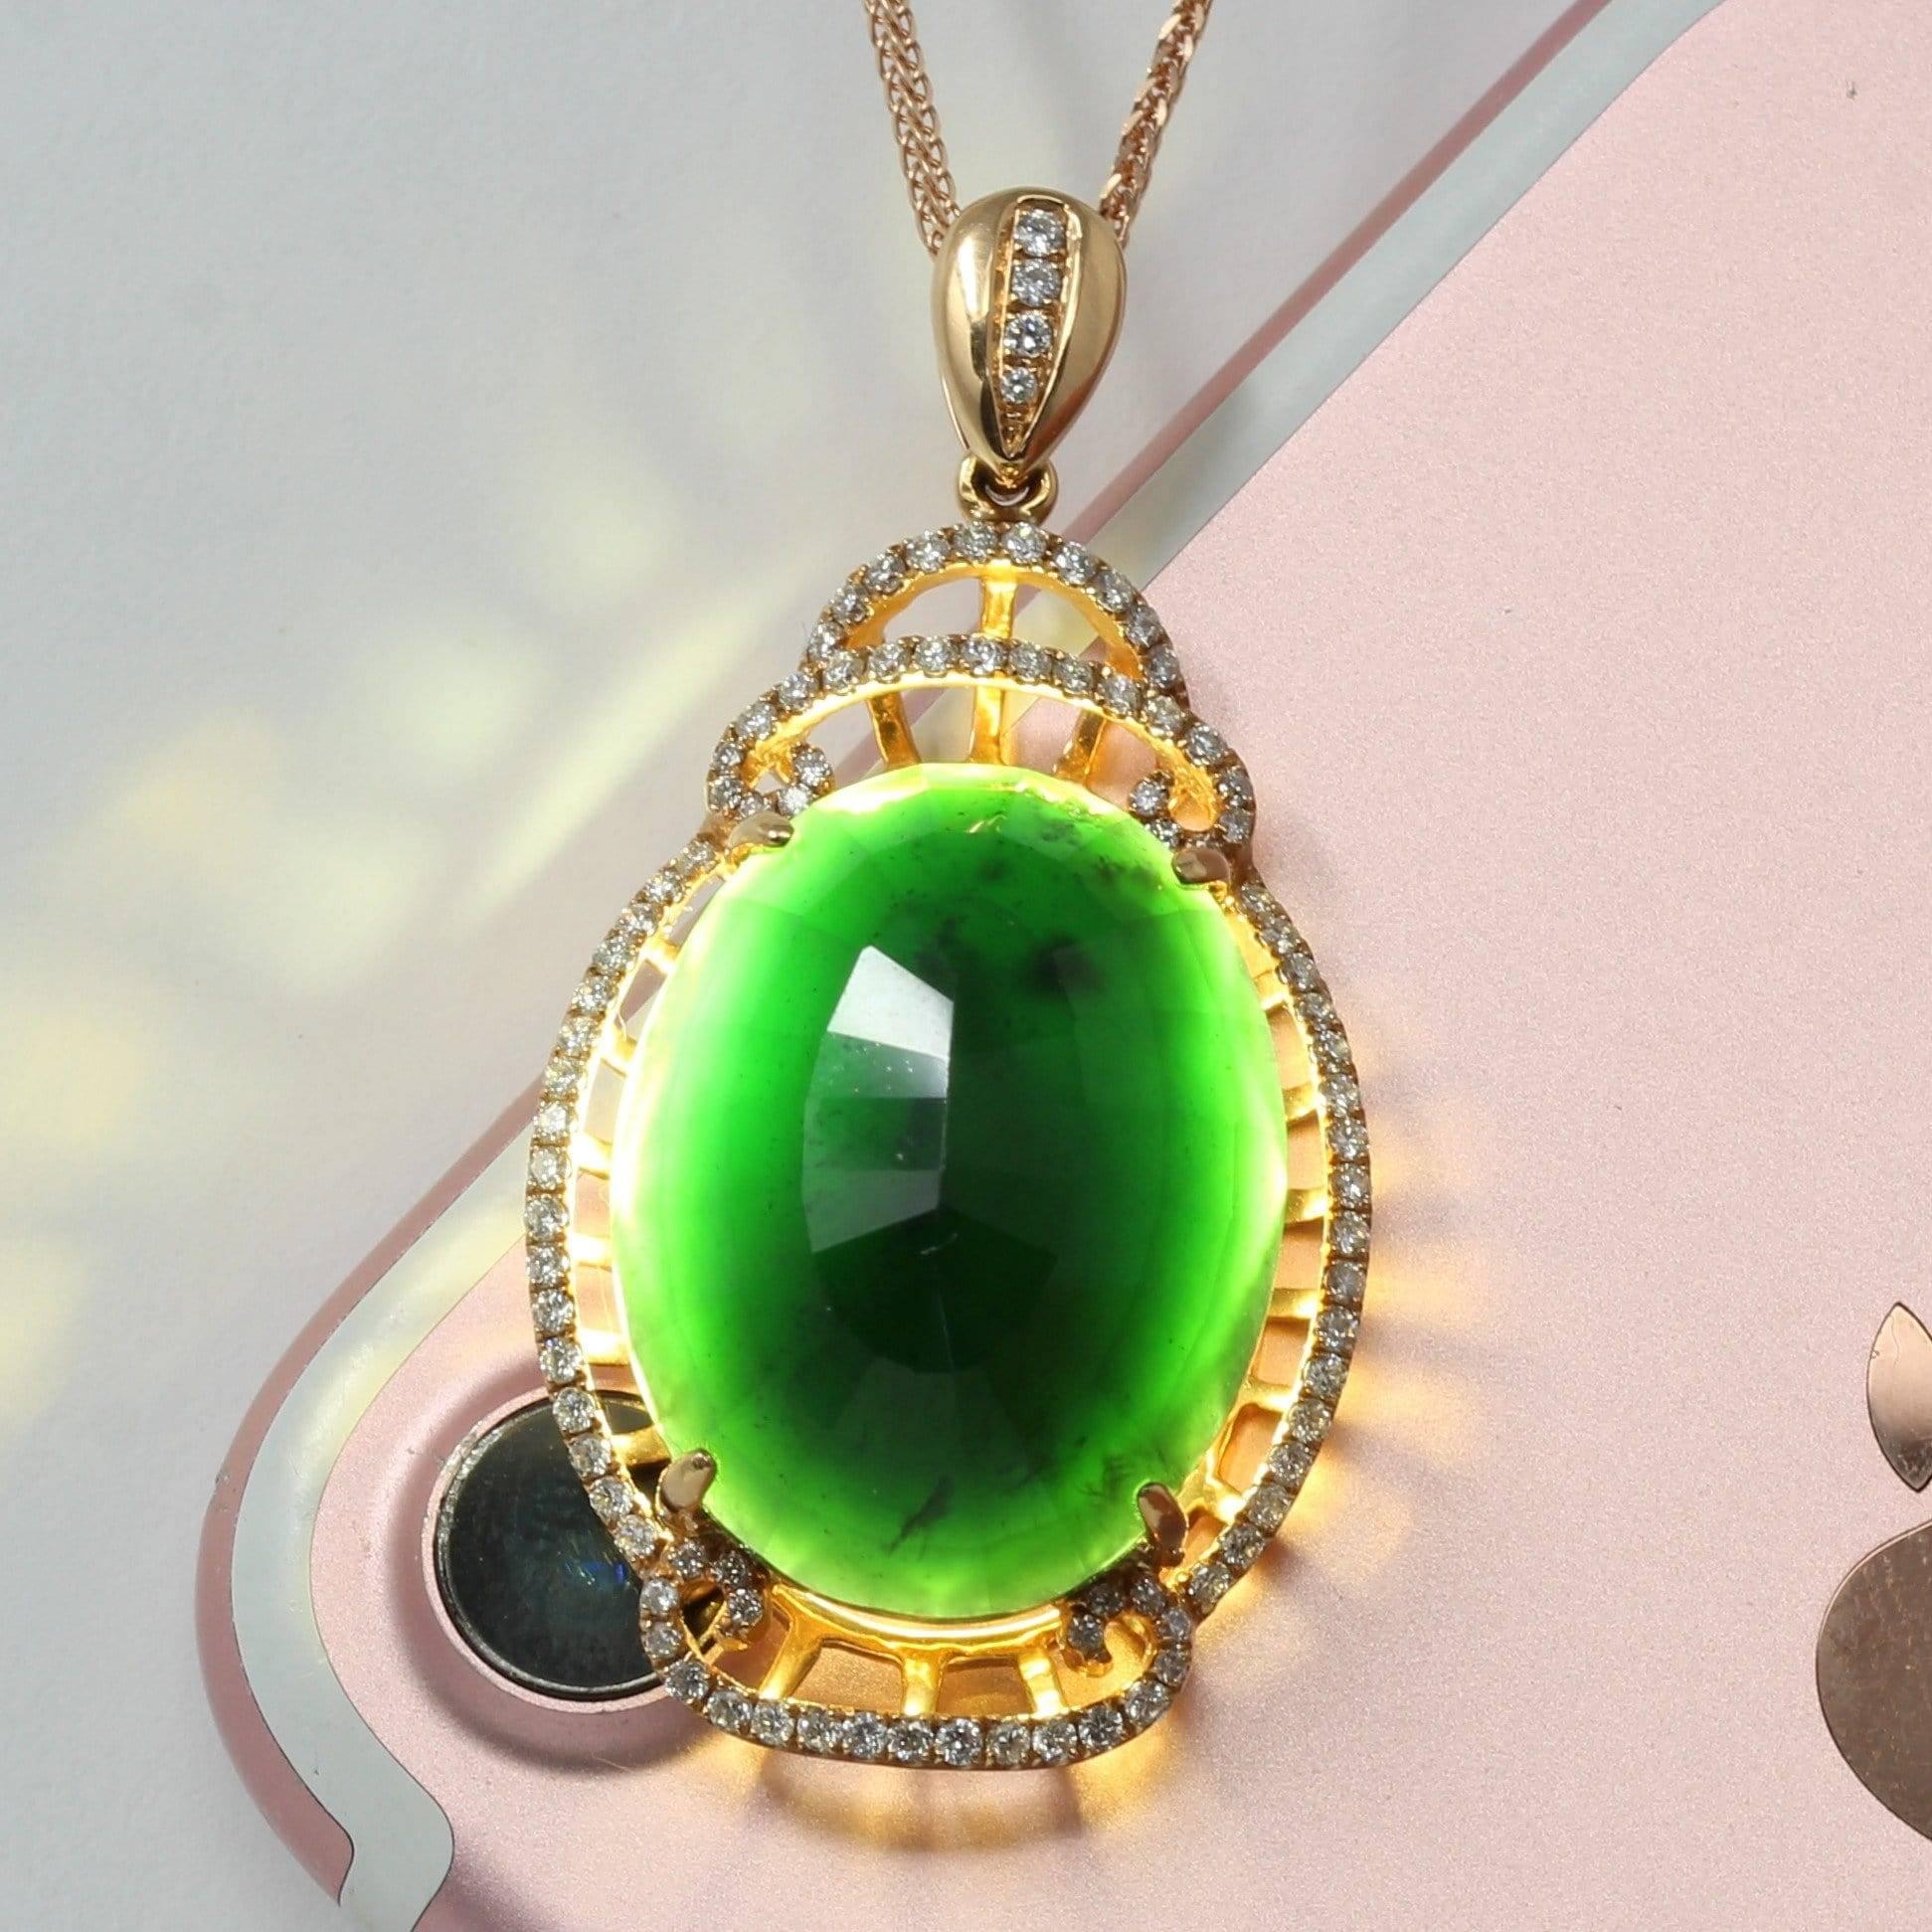 DESIGN CONCEPT--- This 18k rose gold necklace is made with high-quality genuine black Burmese jadeite that is truly one of a kind. 27 ct of rich, black color with the magical property of black jade which shows green under the light. The design was a